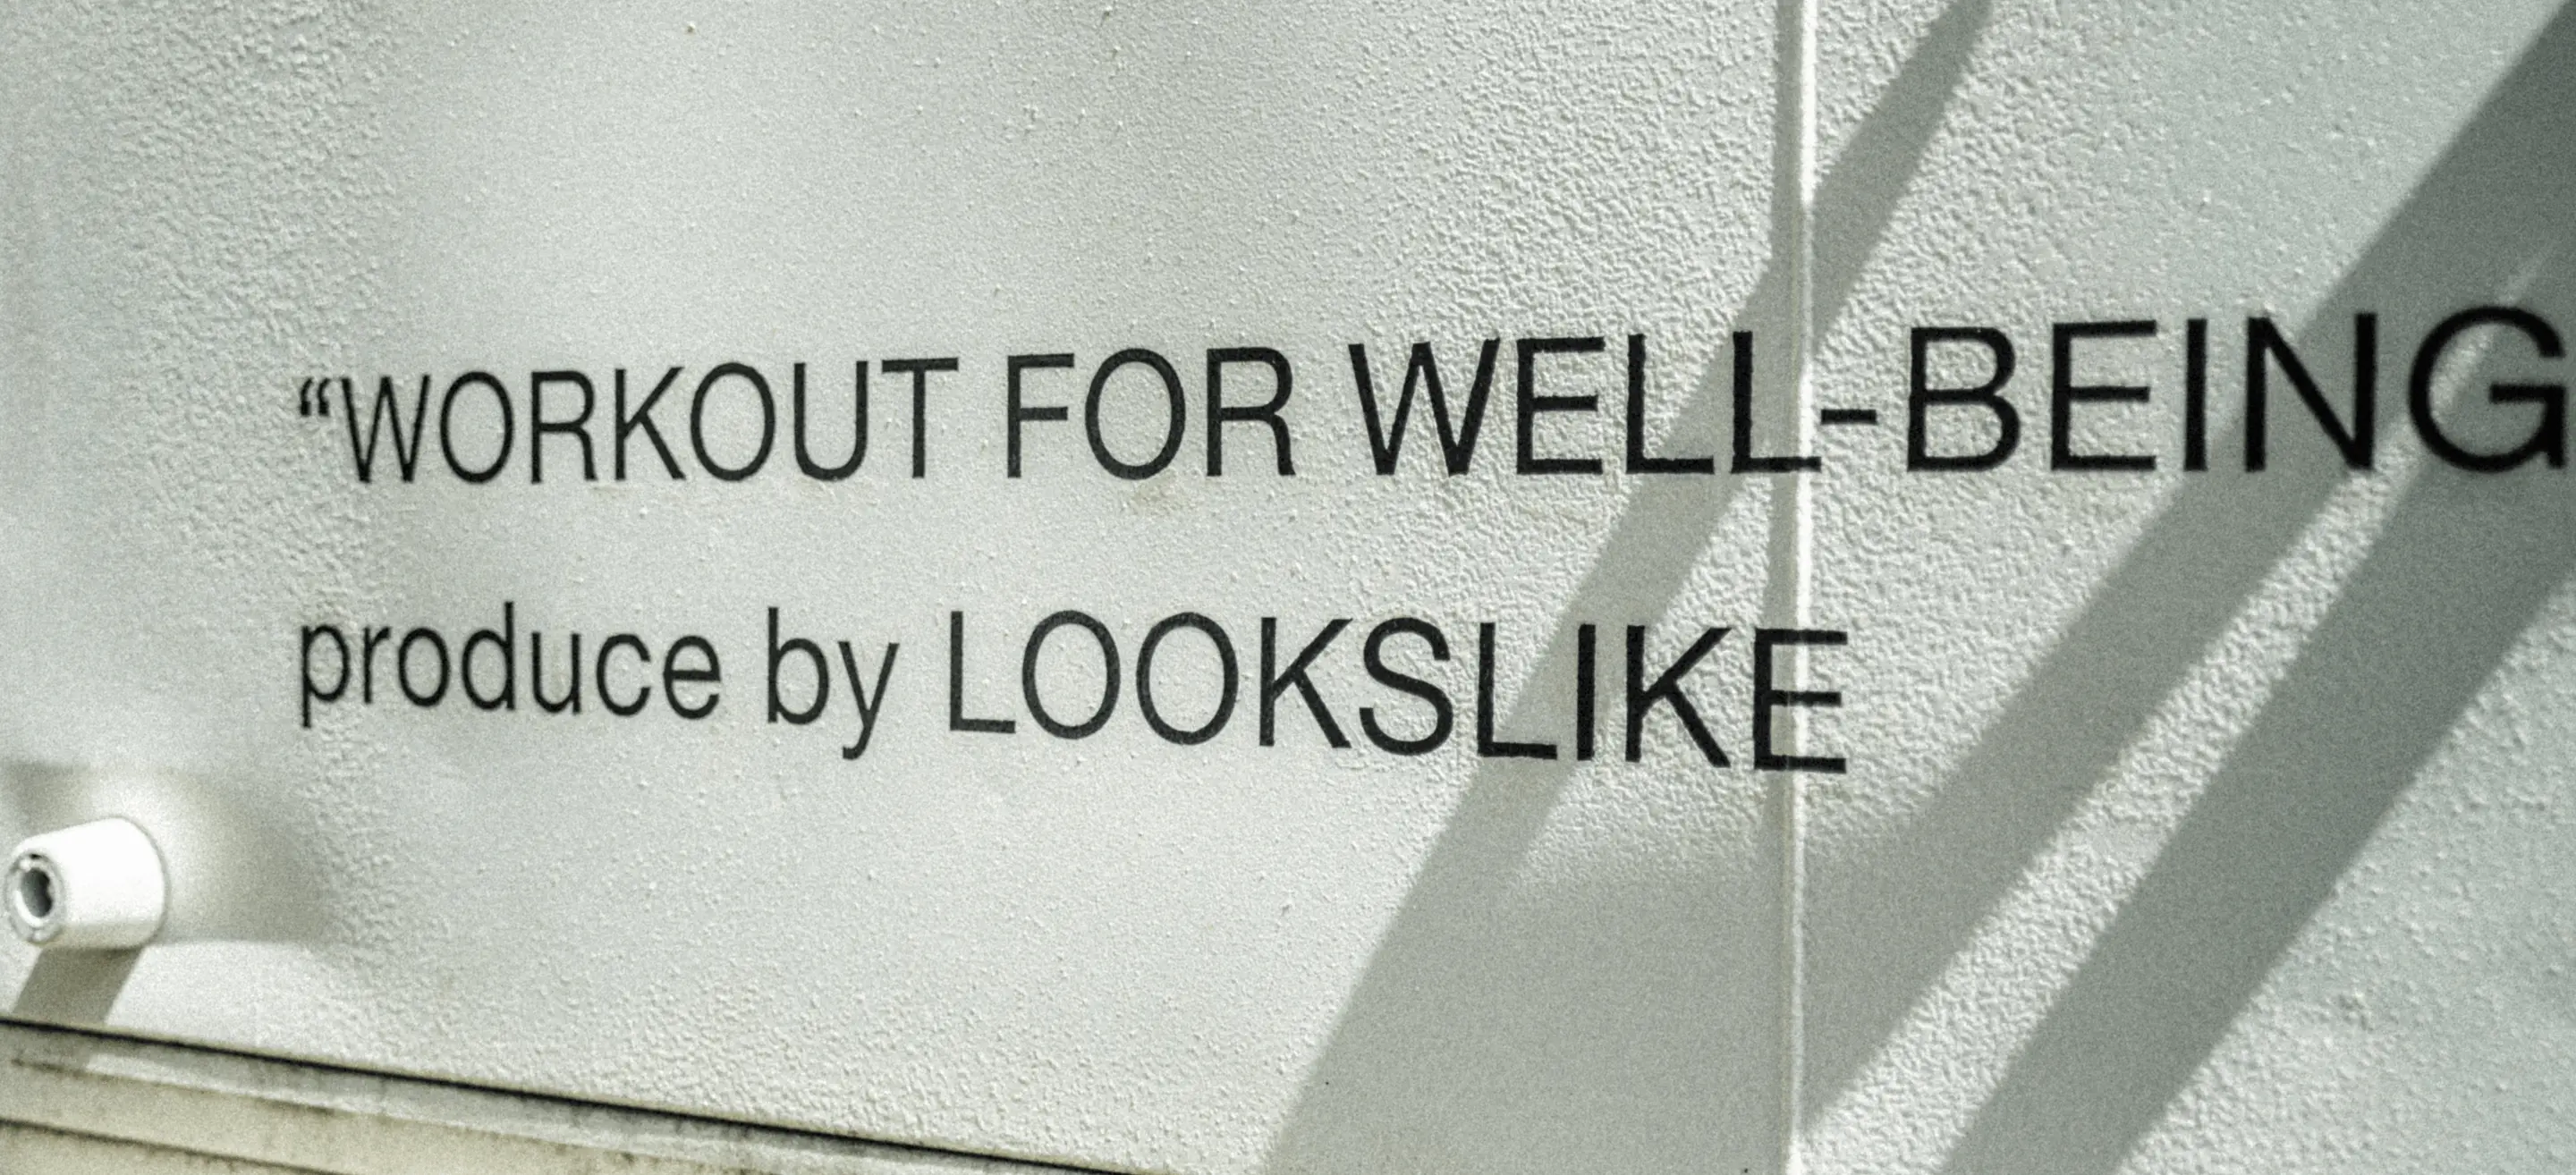 WORK OUT FOR WELL-BEING produce by LOOKSLIKE